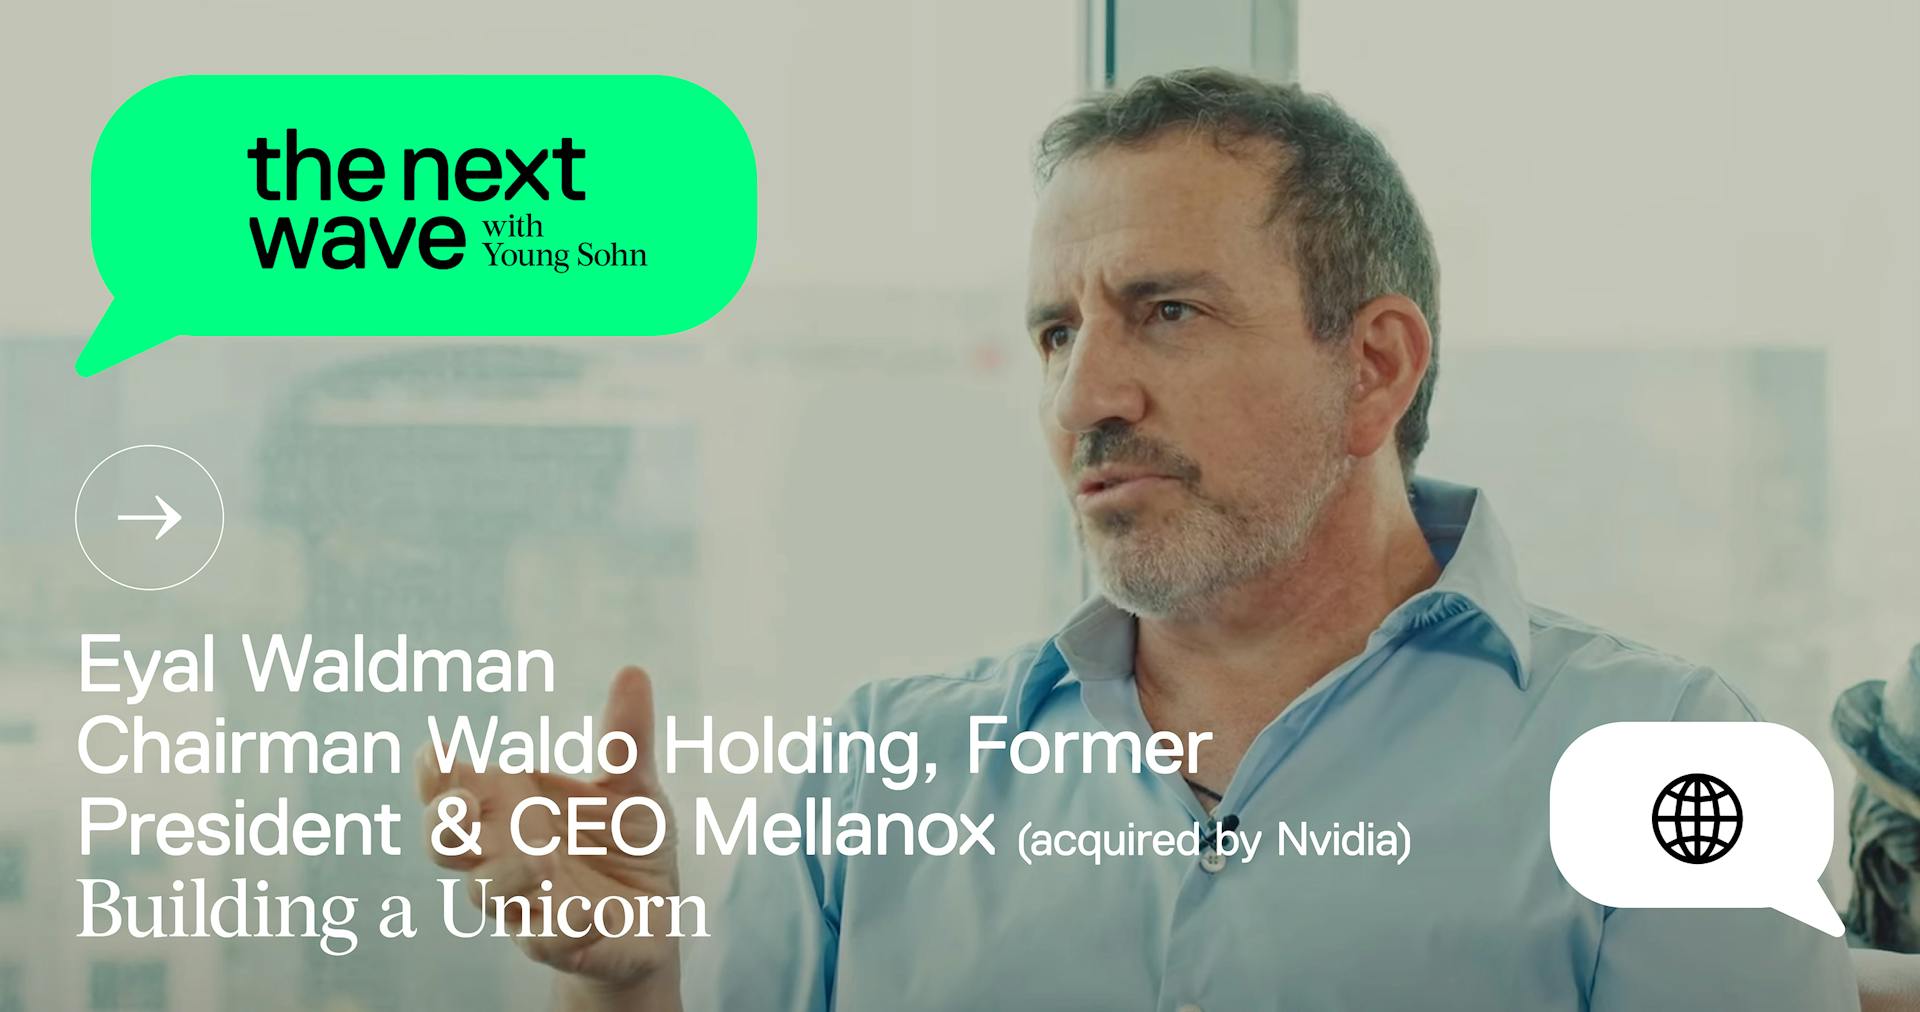 Building a Unicorn: Lessons Learned by Eyal Waldman, Chairman Waldo Holding, Former President and CEO Mellanox (acquired by Nvidia)